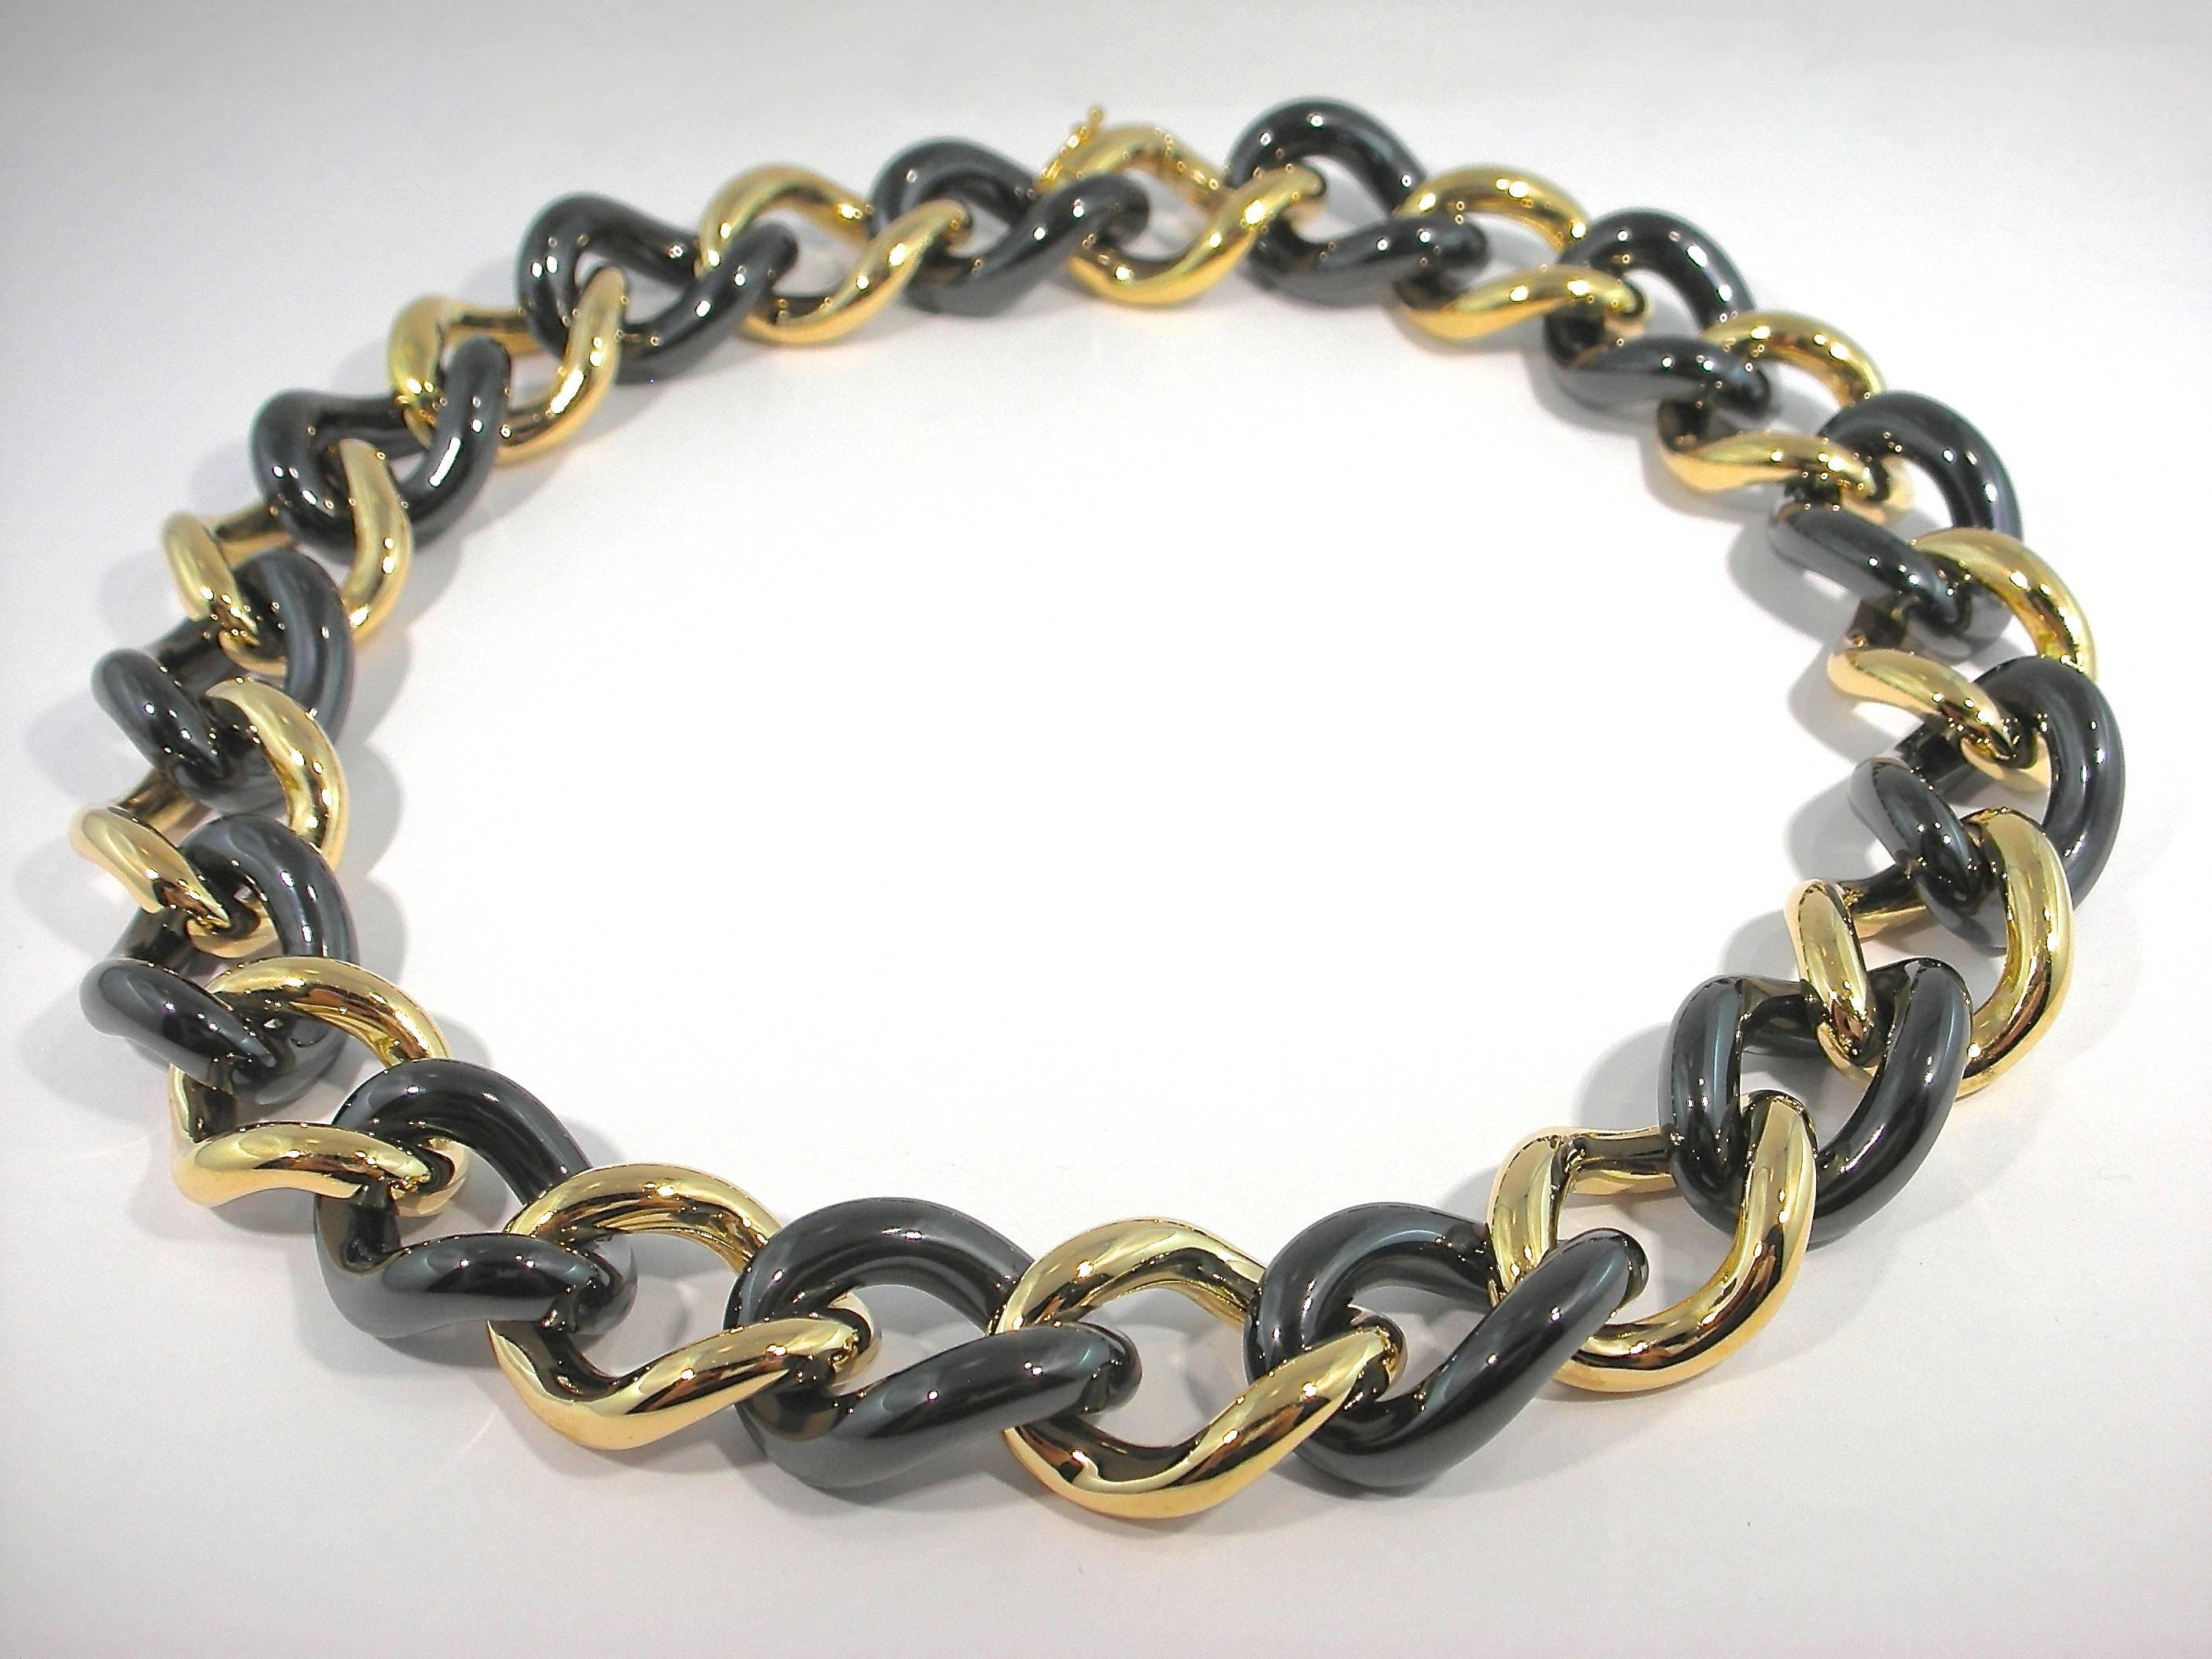 Jona design collection, hand crafted in Italy, 18k yellow gold and black high-tech ceramic curb-link necklace. 44.5 cm long.
With a hardness approaching that of diamond, high-tech ceramic is a highly
scratch-resistant material. Light and